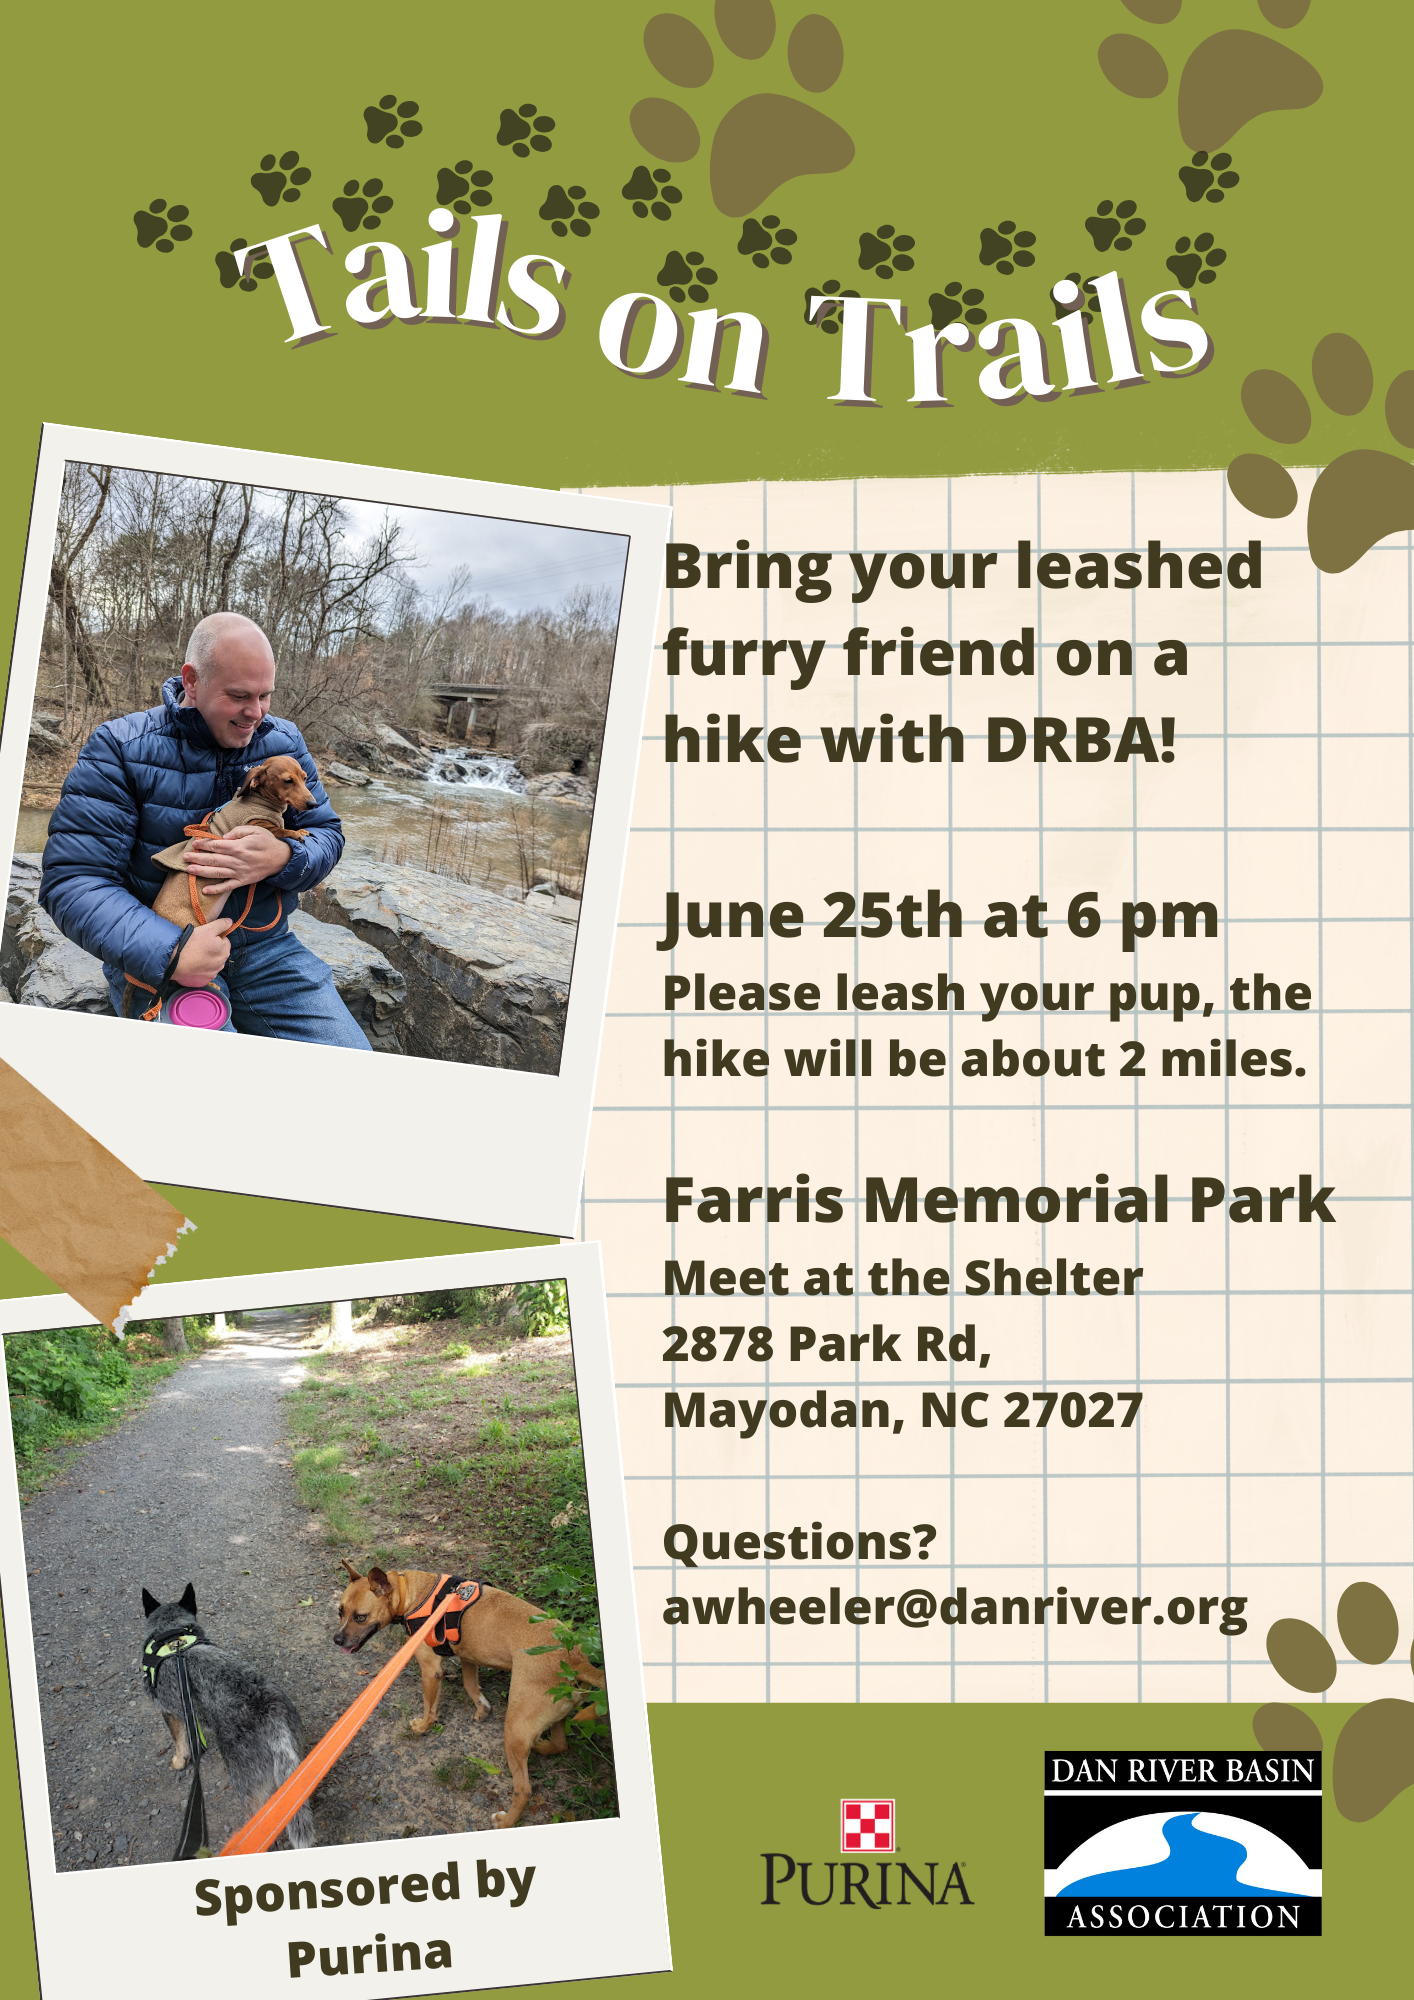 TAILS ON TRAILS FLYER WITH INFORMATION LISTED IN THE TEXT. PHOTOS OF CUTE PUPPIES ON THE TRAIL.